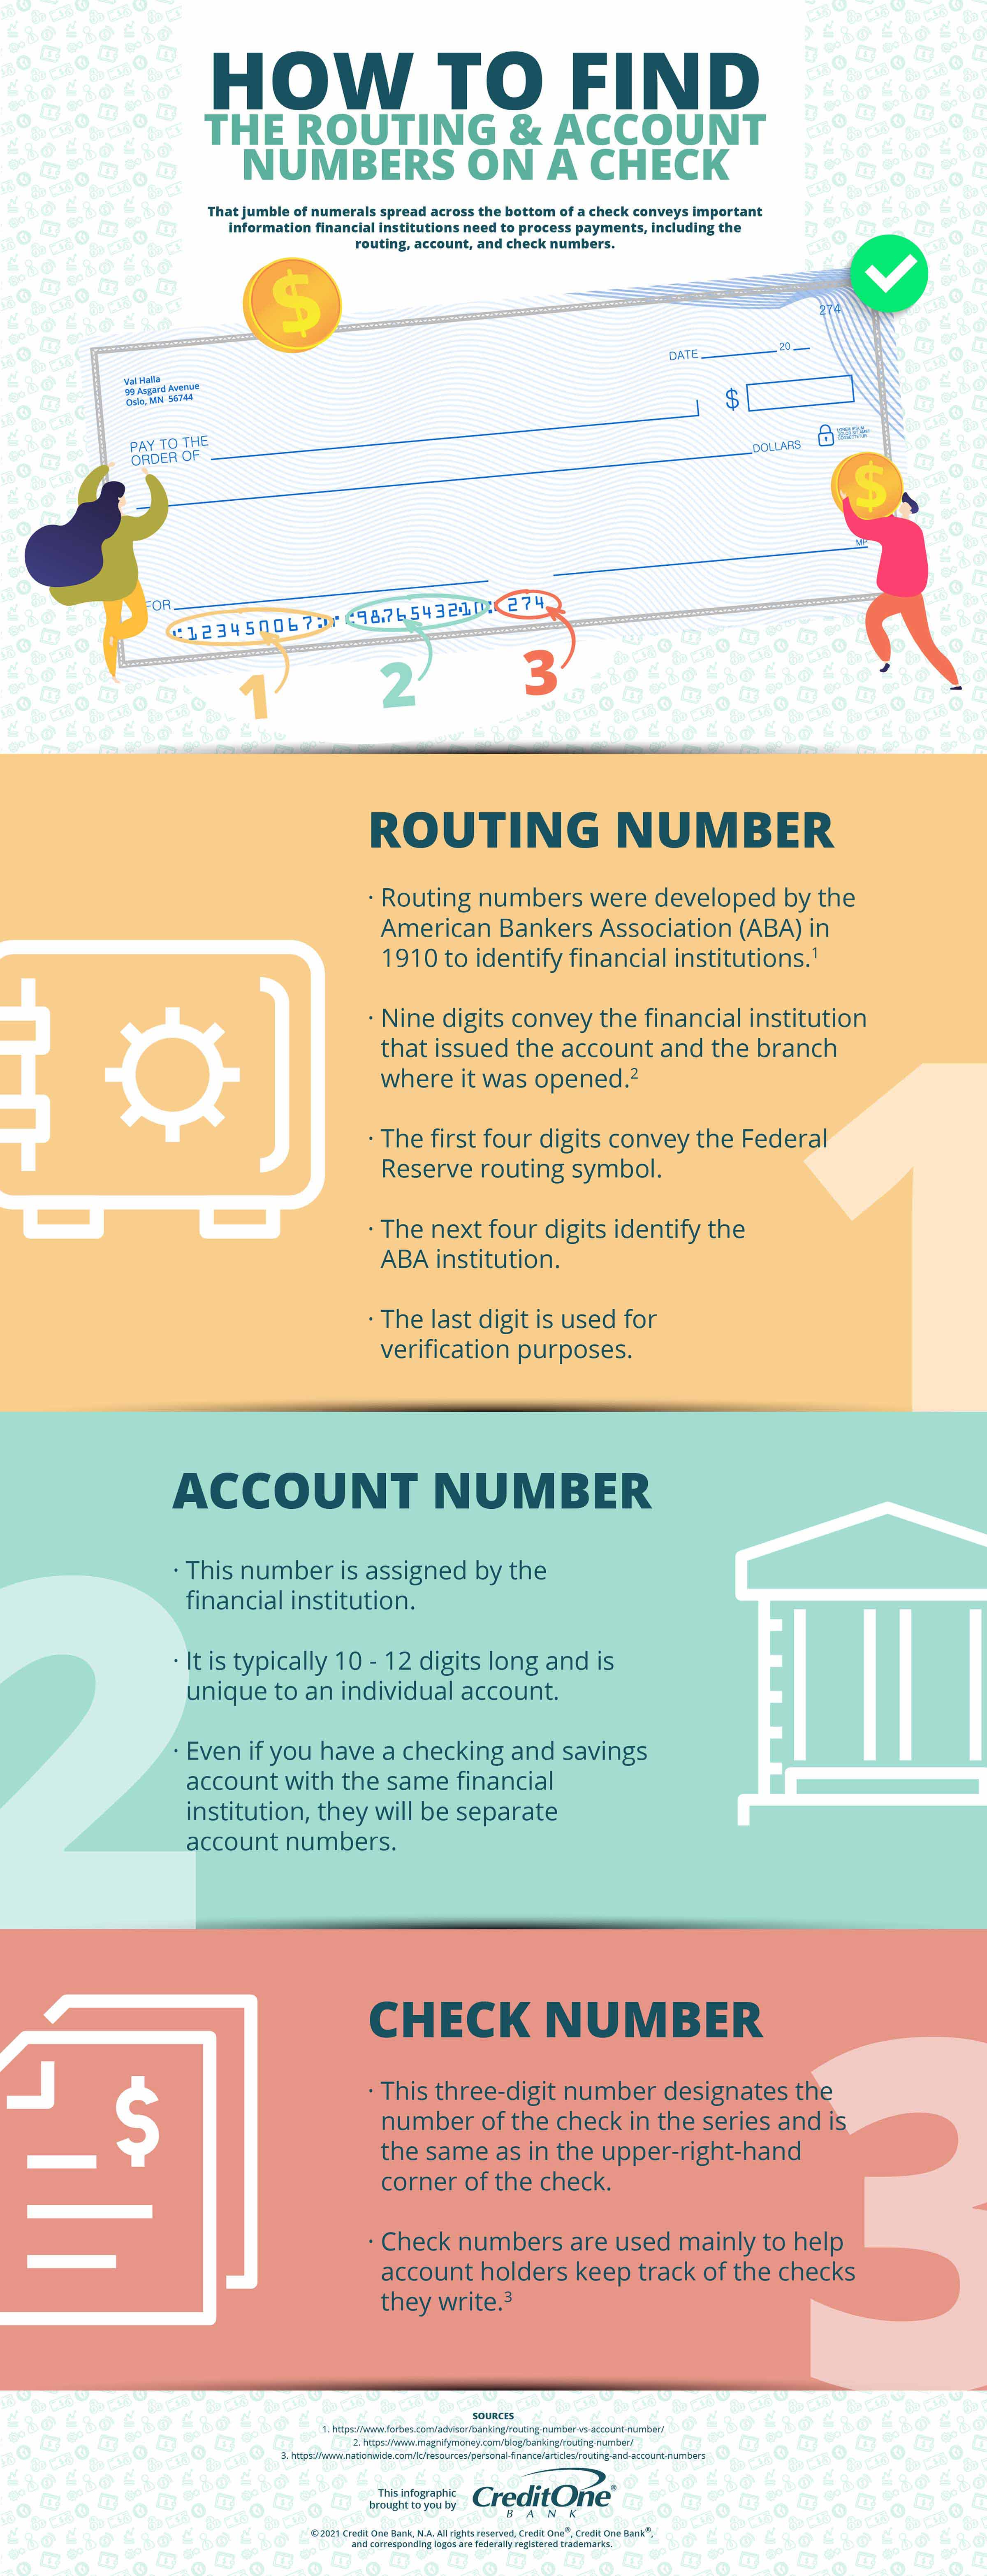 How to Locate the Routing and Account Numbers on a Check